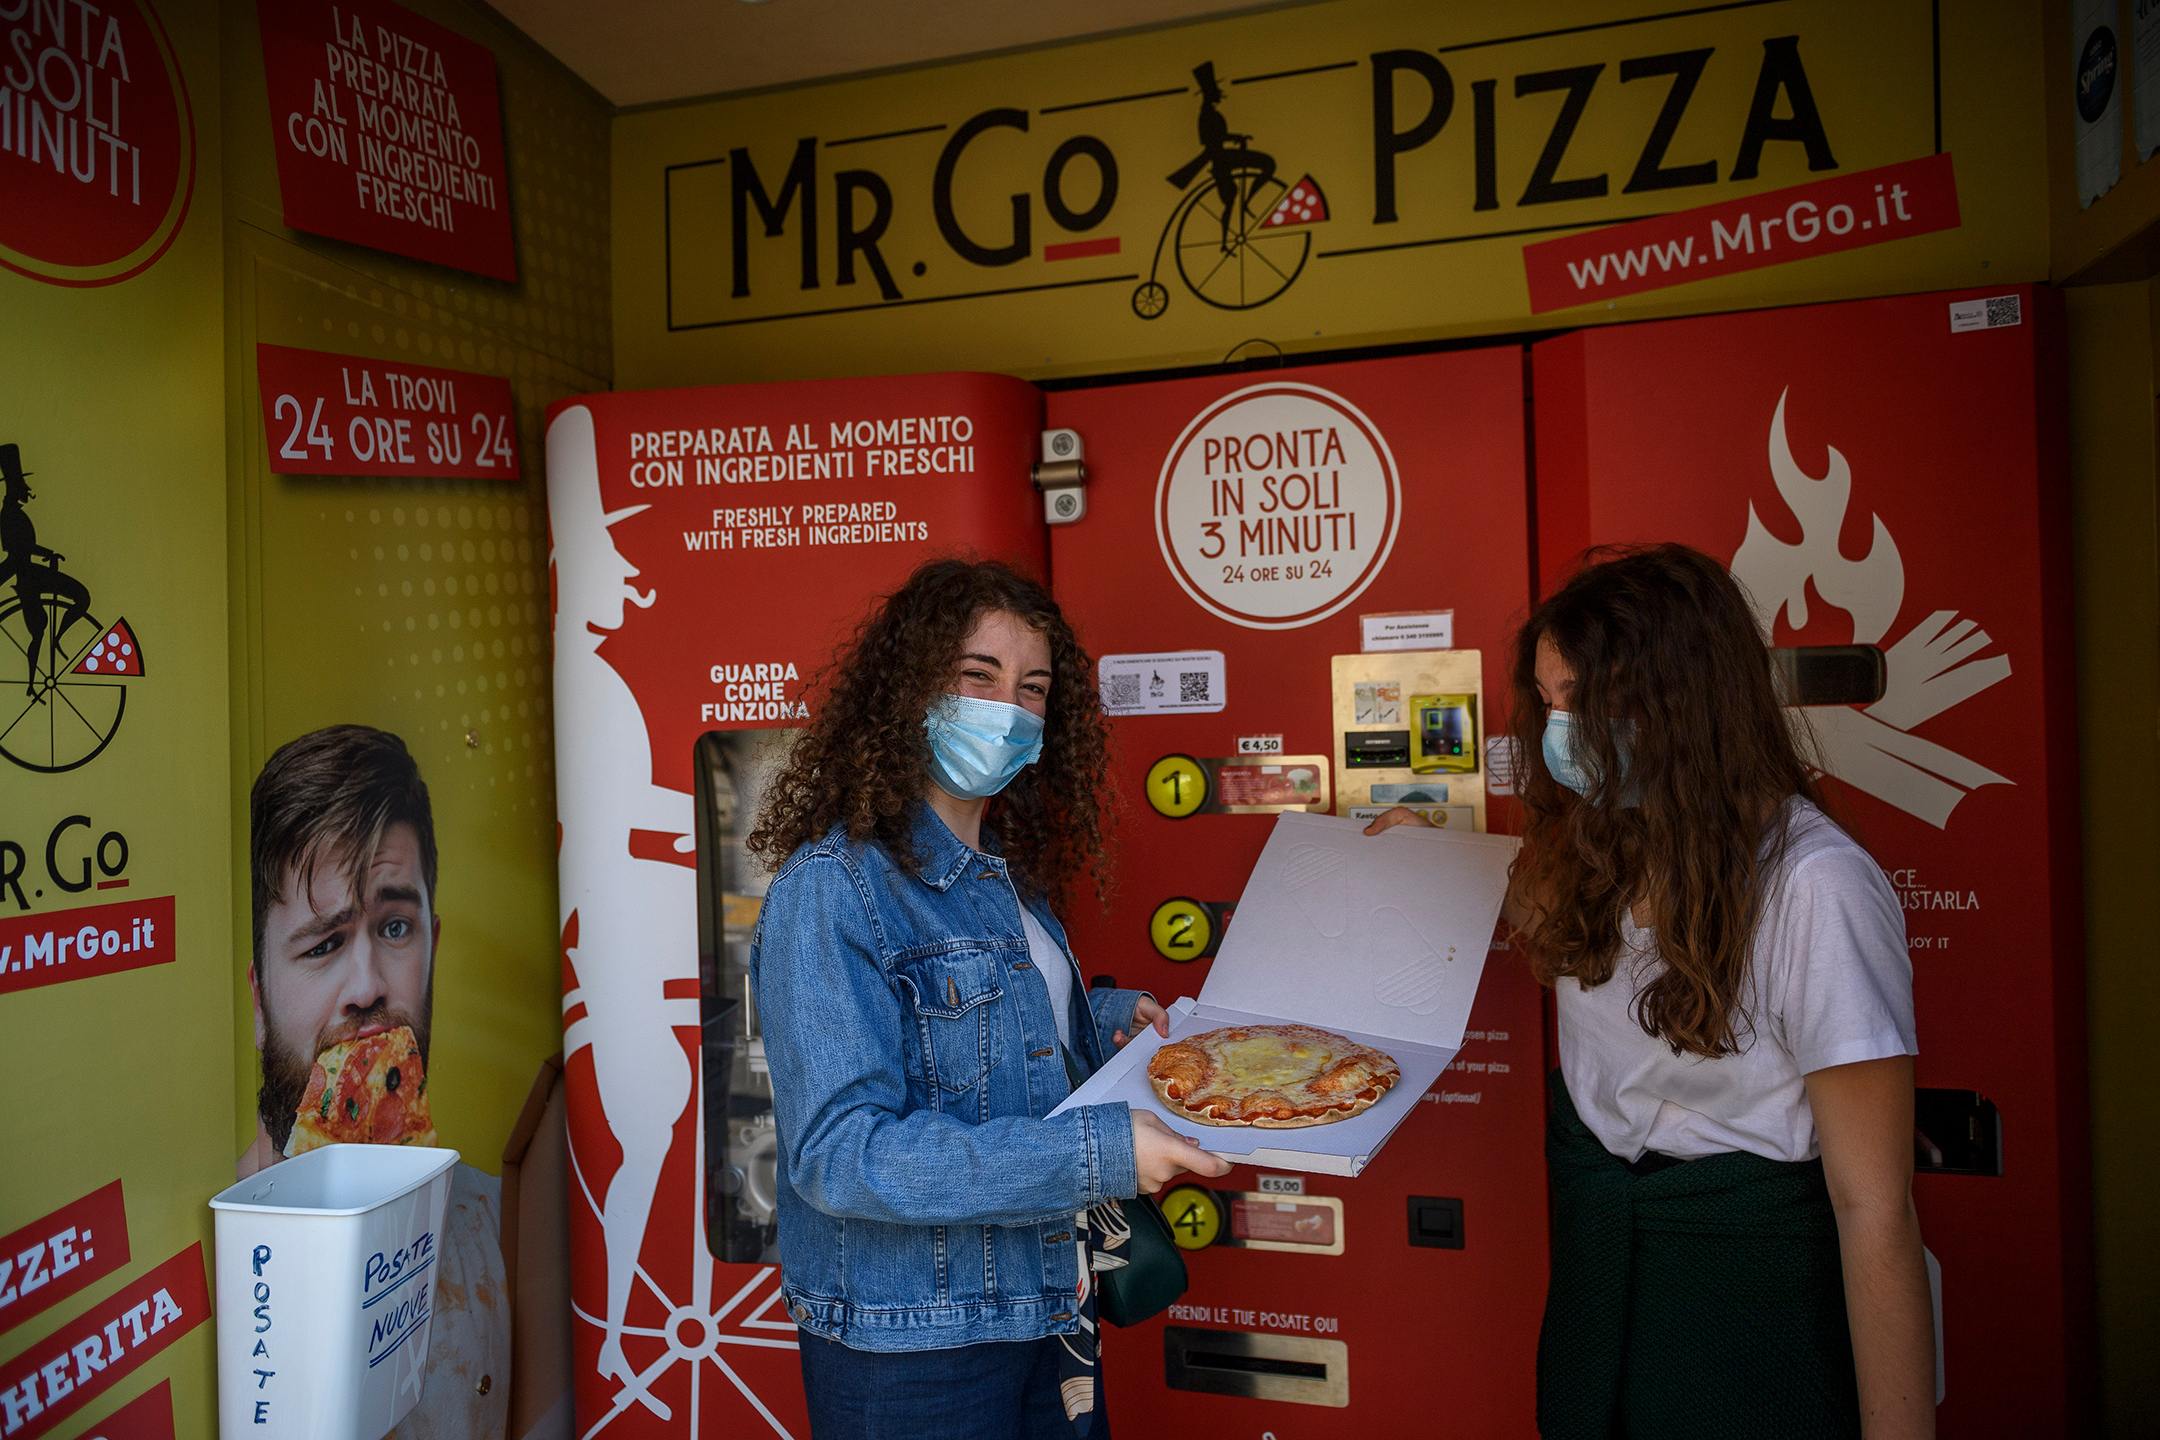 Two young women, both wearing face masks, hold a pizza in front of a red pizza vending machine